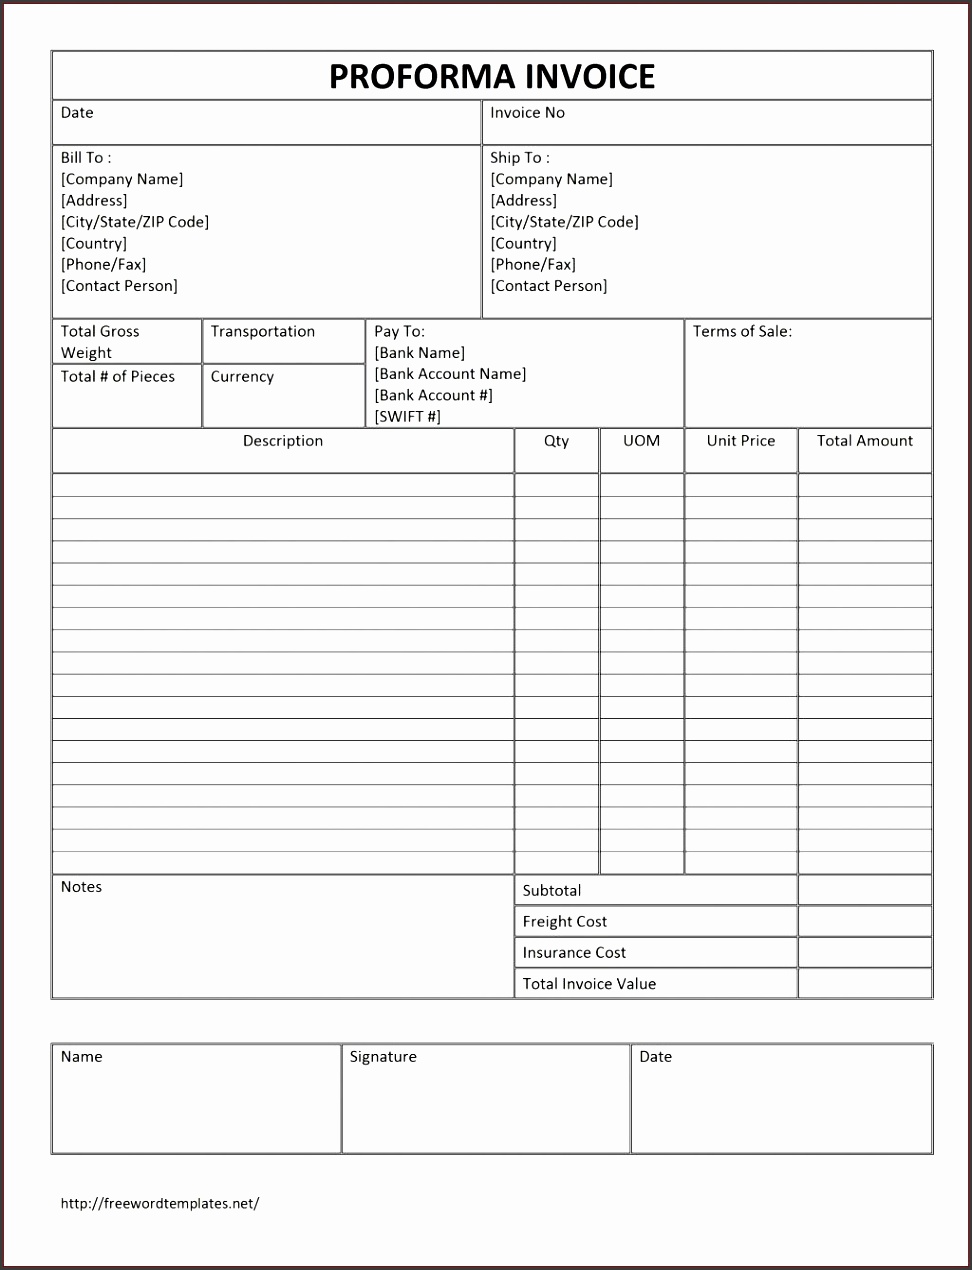 simple proforma invoice sample home tax real estateertificate agreement template property only excel free